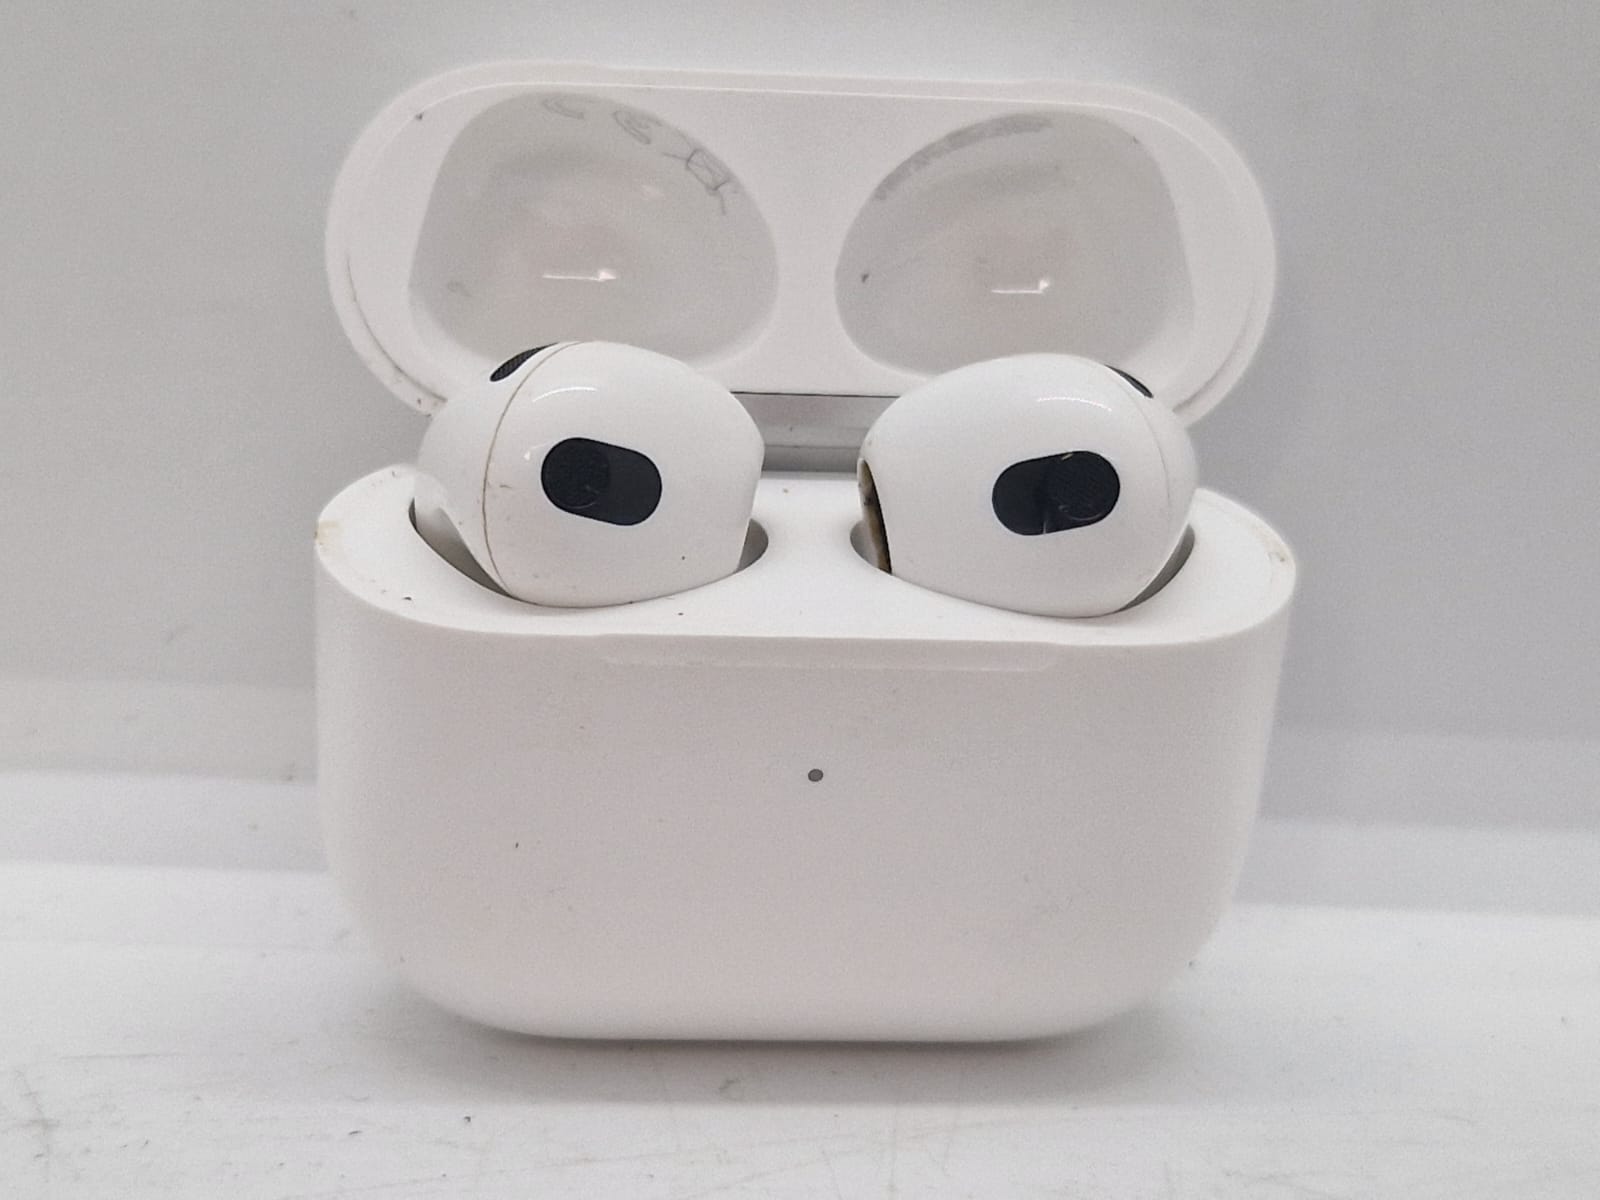 Apple AirPod Gen 3 With Wired Charging Case